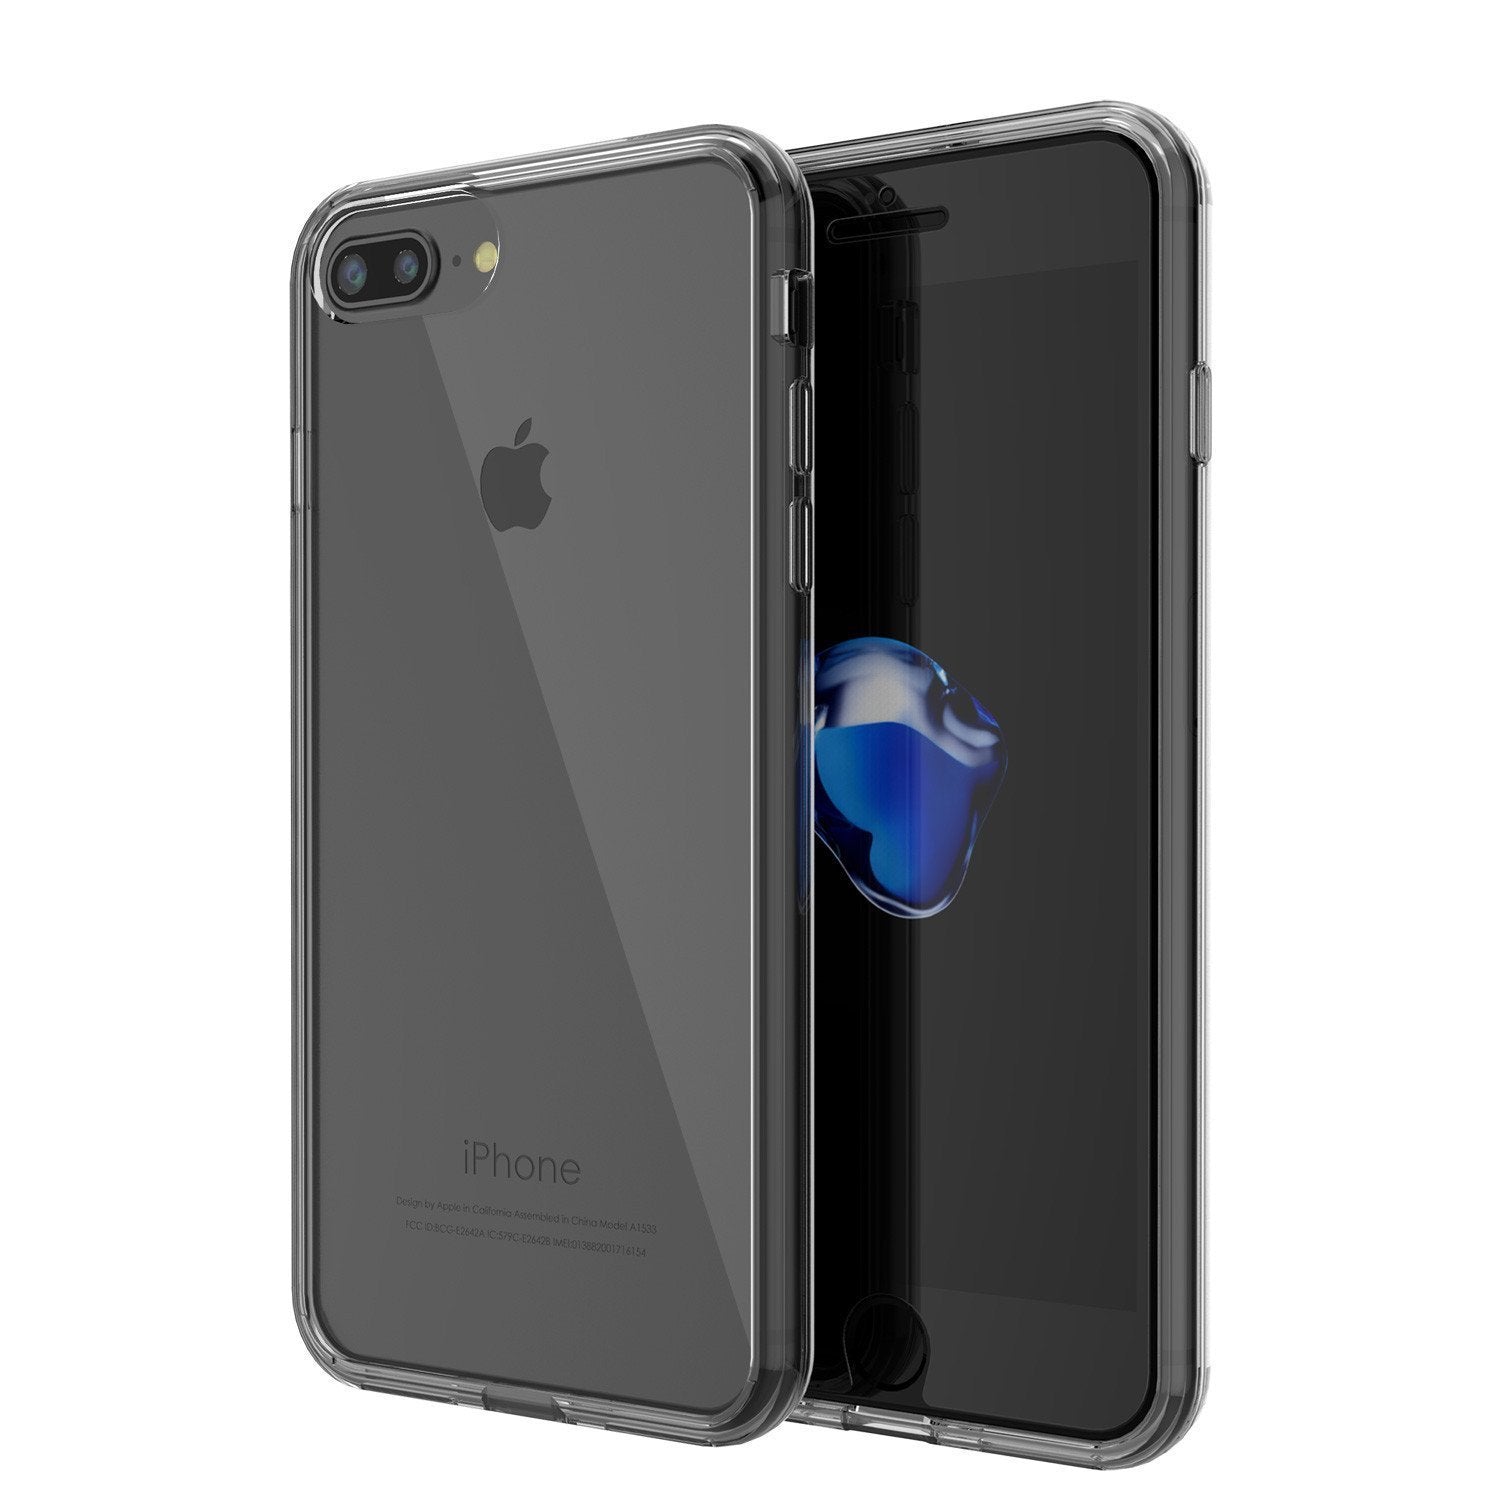 iPhone 8+ Plus Case Punkcase® LUCID 2.0 Crystal Black Series w/ SHIELD Screen Protector | Ultra Fit